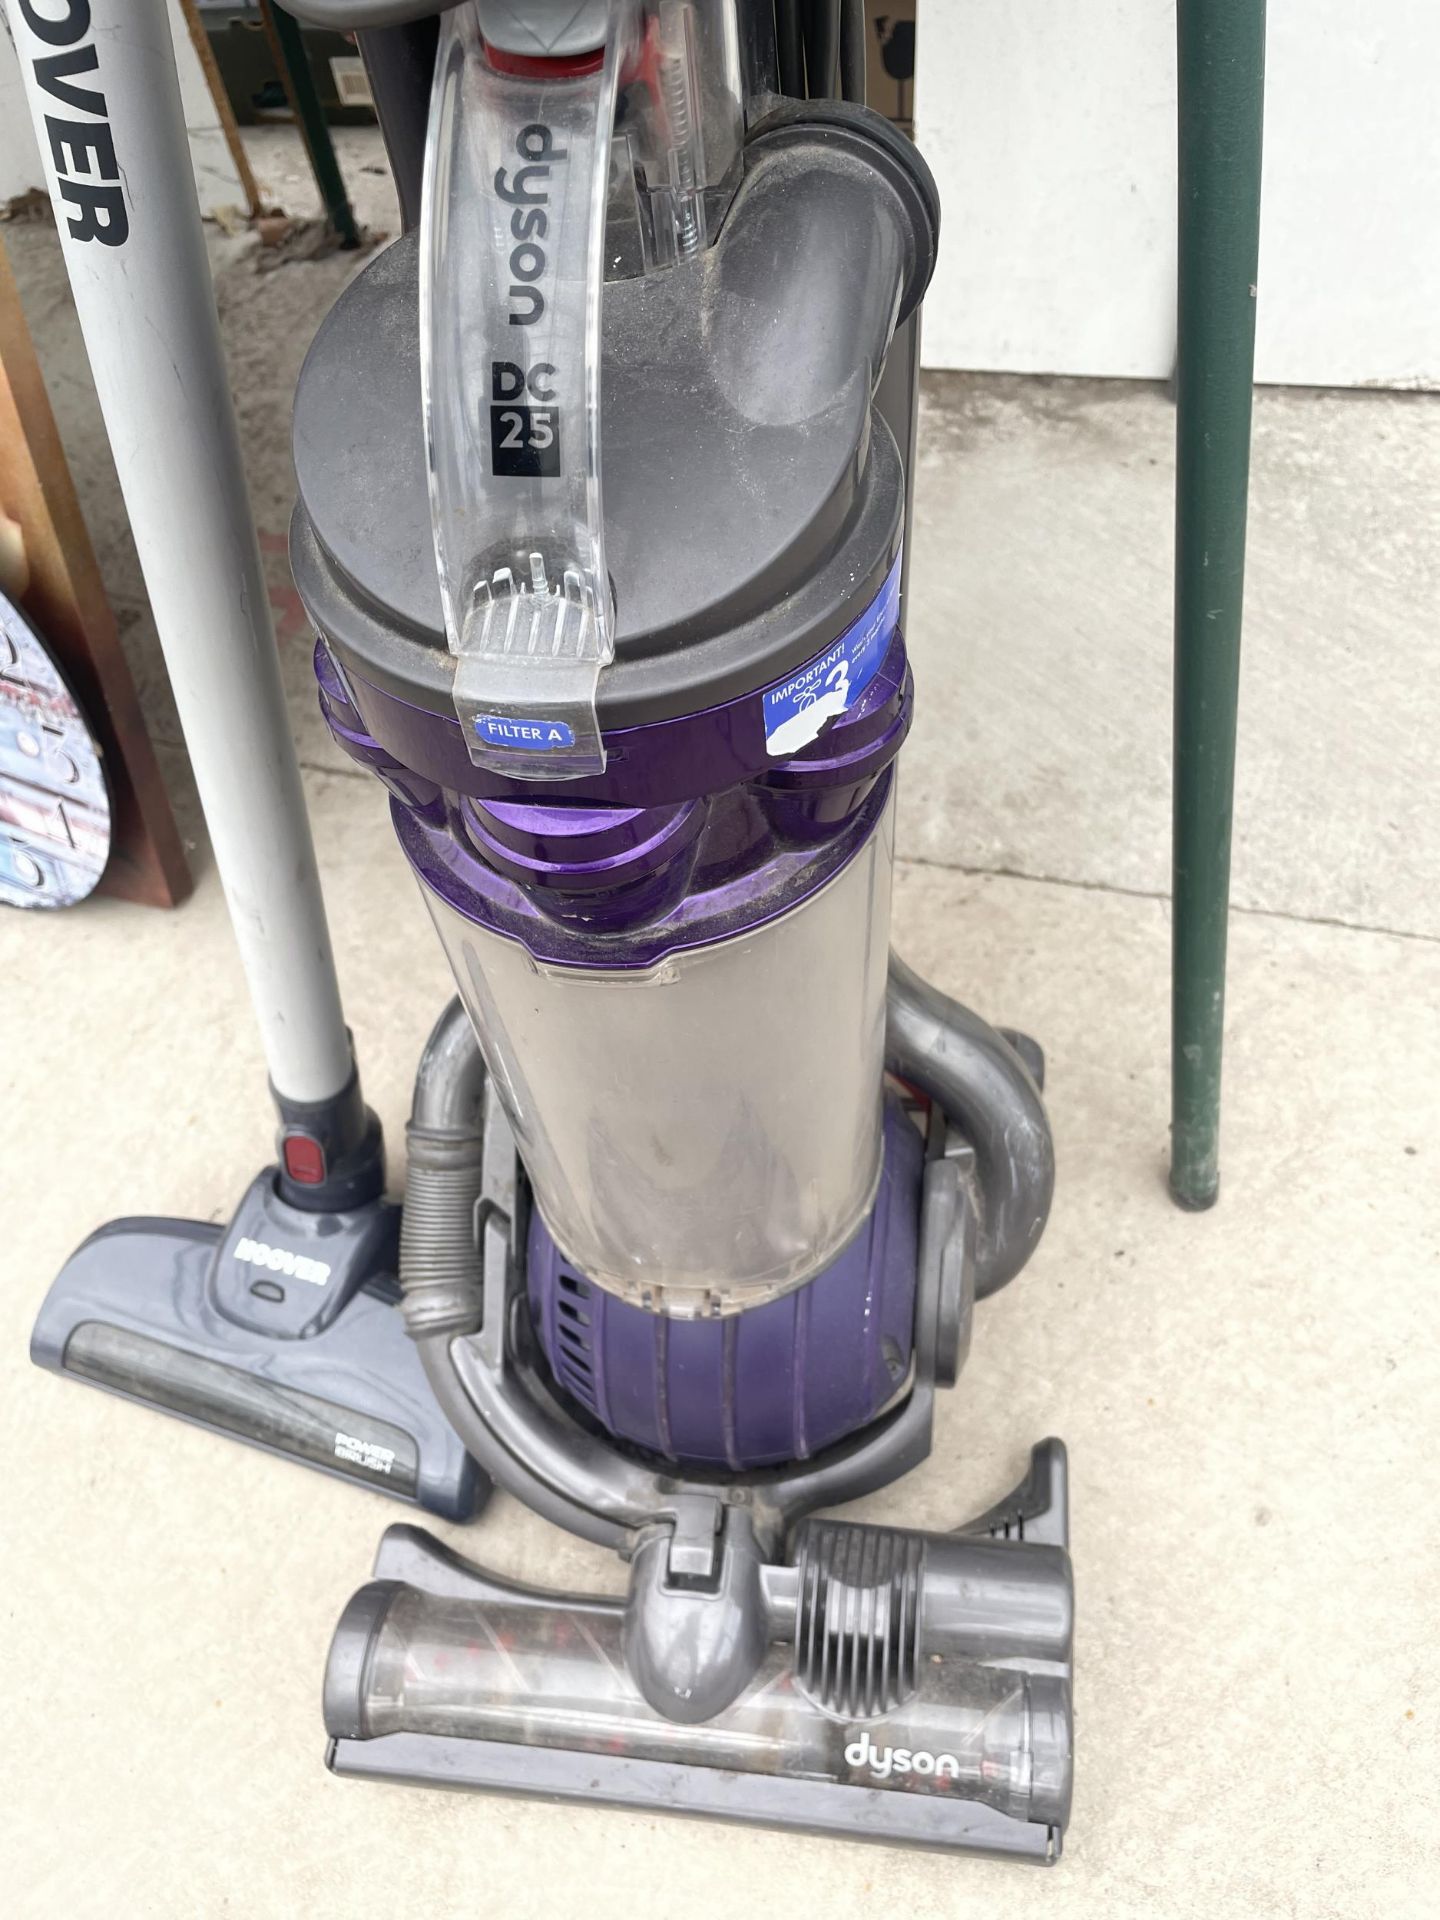 A DYSON DC25 VACUUM CLEANER AND A FURTHER HOOVER HAND HELD VACUUM - Image 3 of 3